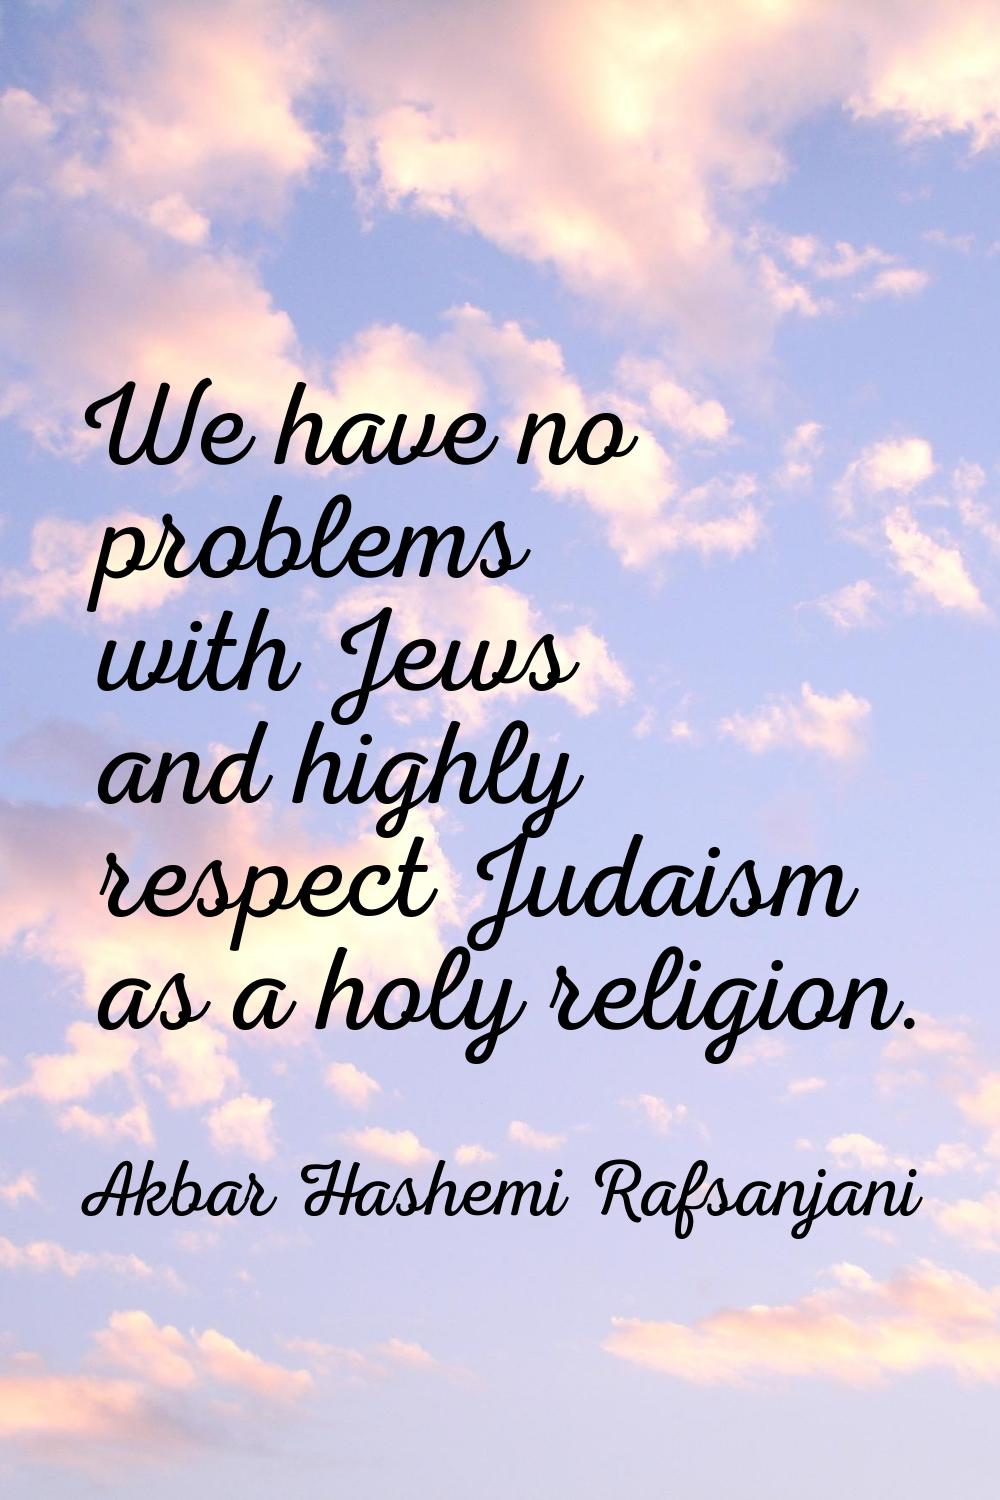 We have no problems with Jews and highly respect Judaism as a holy religion.